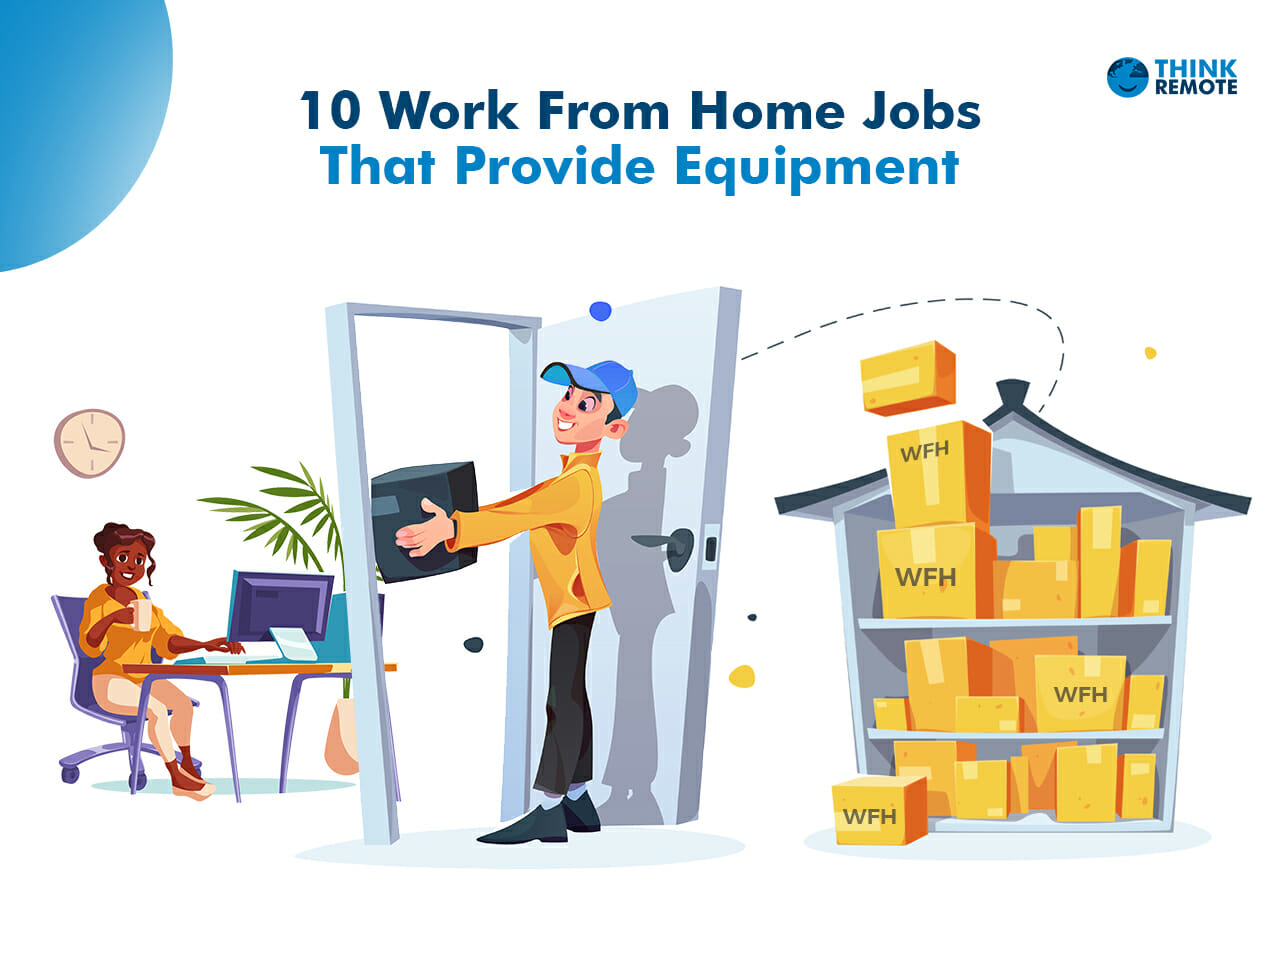 Work-from-Home Equipment: What Employers Typically Provide